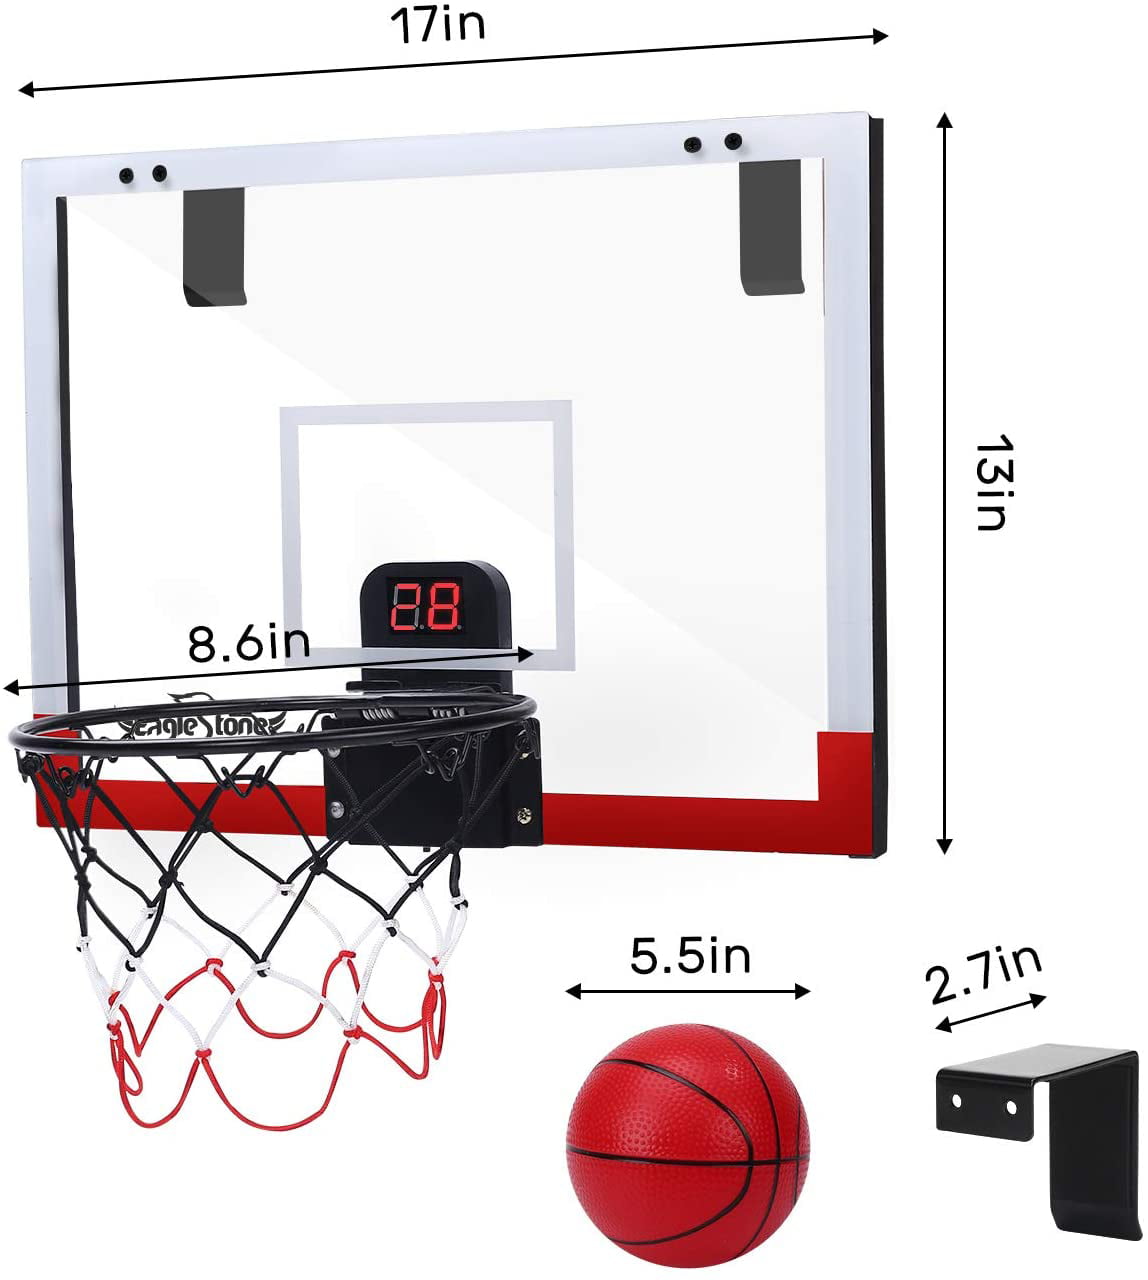 Basketball Toy Set Oreilet Smooth Highly Realistic Mini Basketball Game Fine Workmanship Children Teenager for Kids Baby